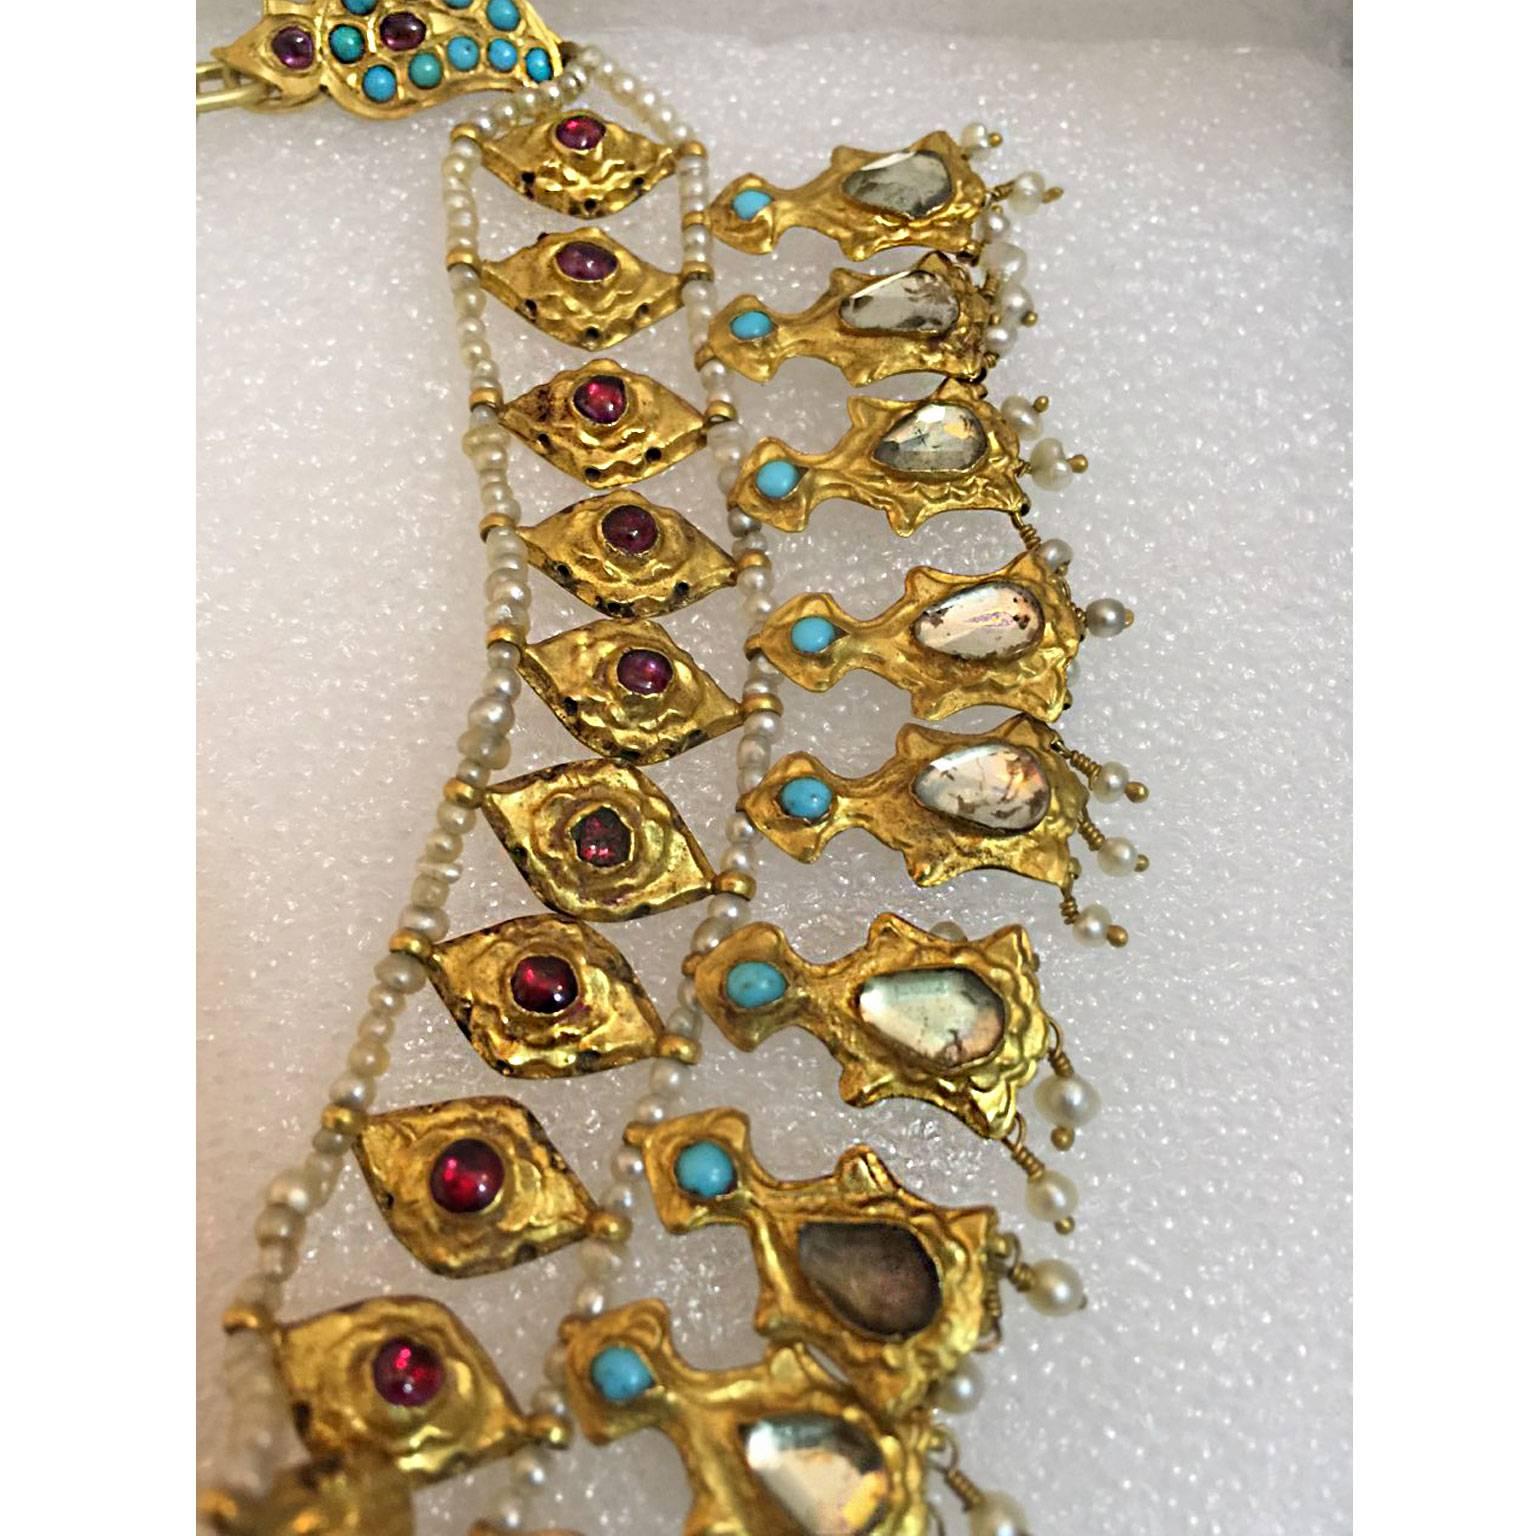 An Antique Rajasthan Mughal necklace made of 22K gold and with a set of ruby, turquoise, pearl and glass. 